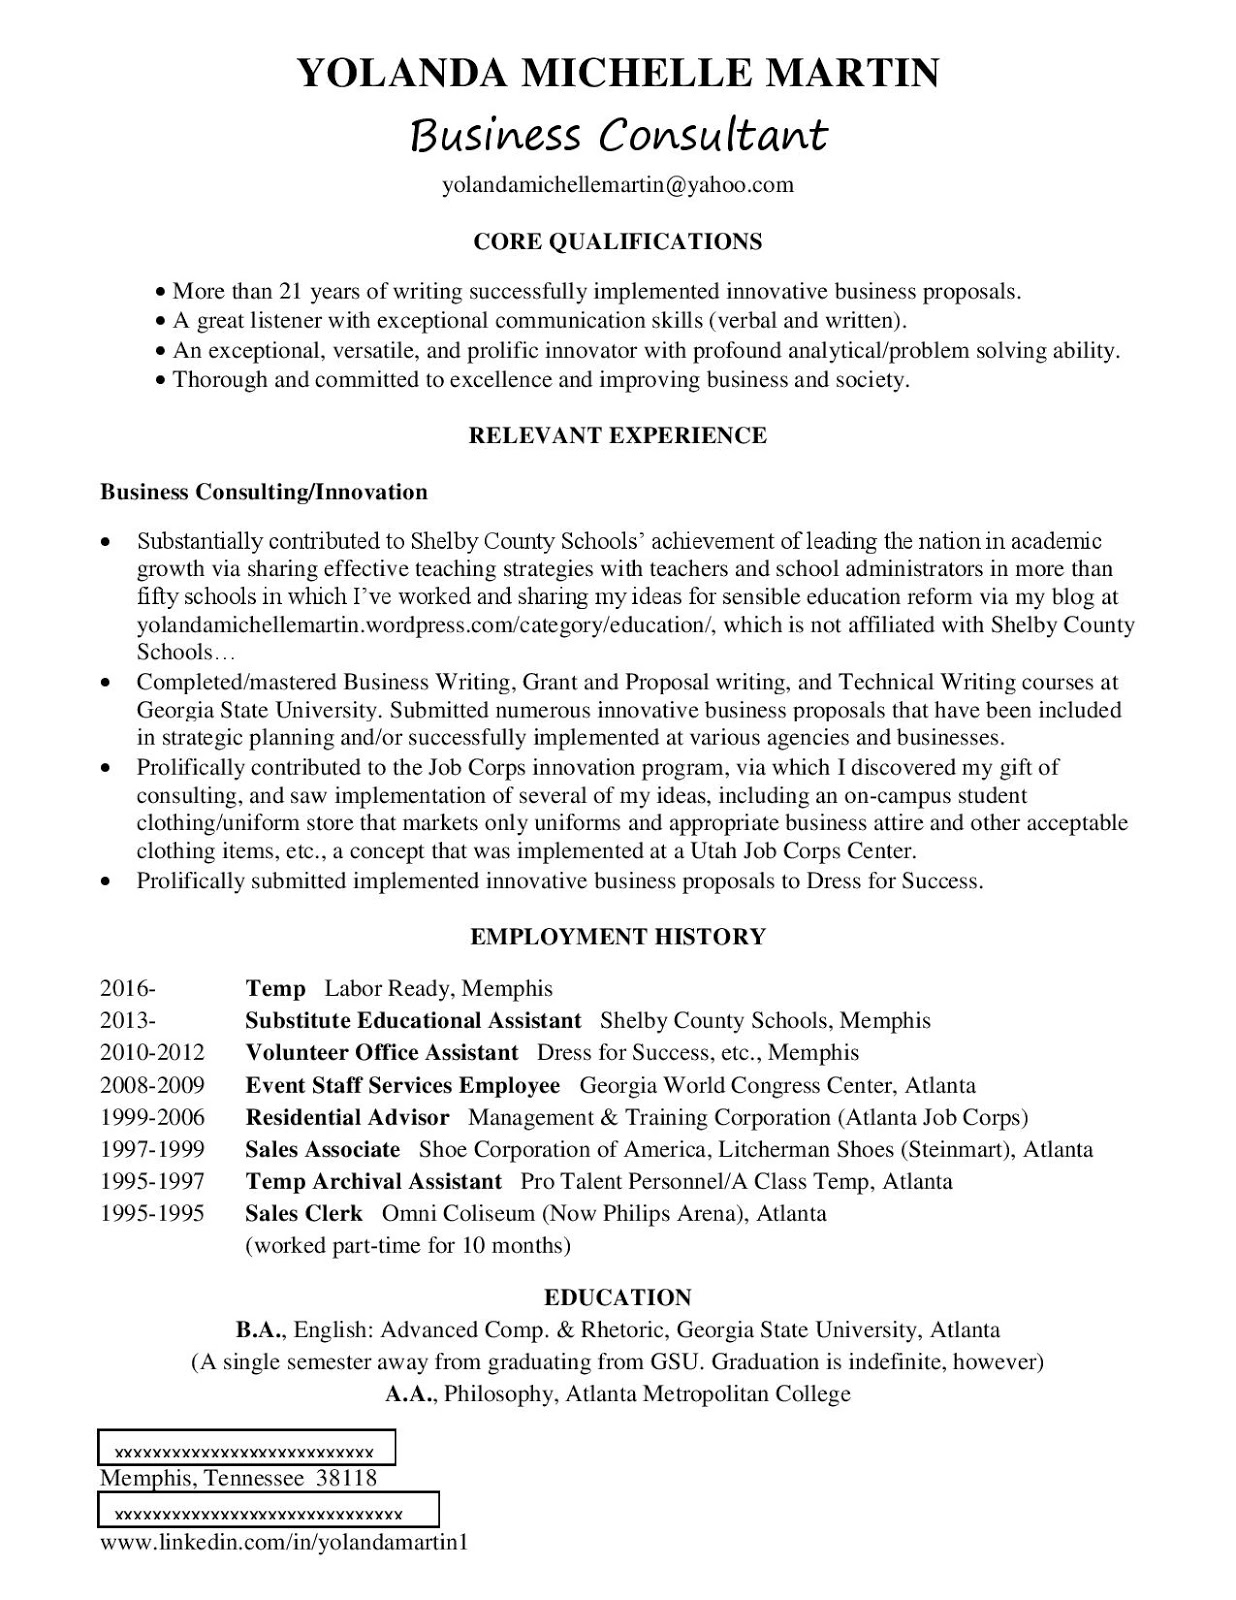 Lapse in employment history resume